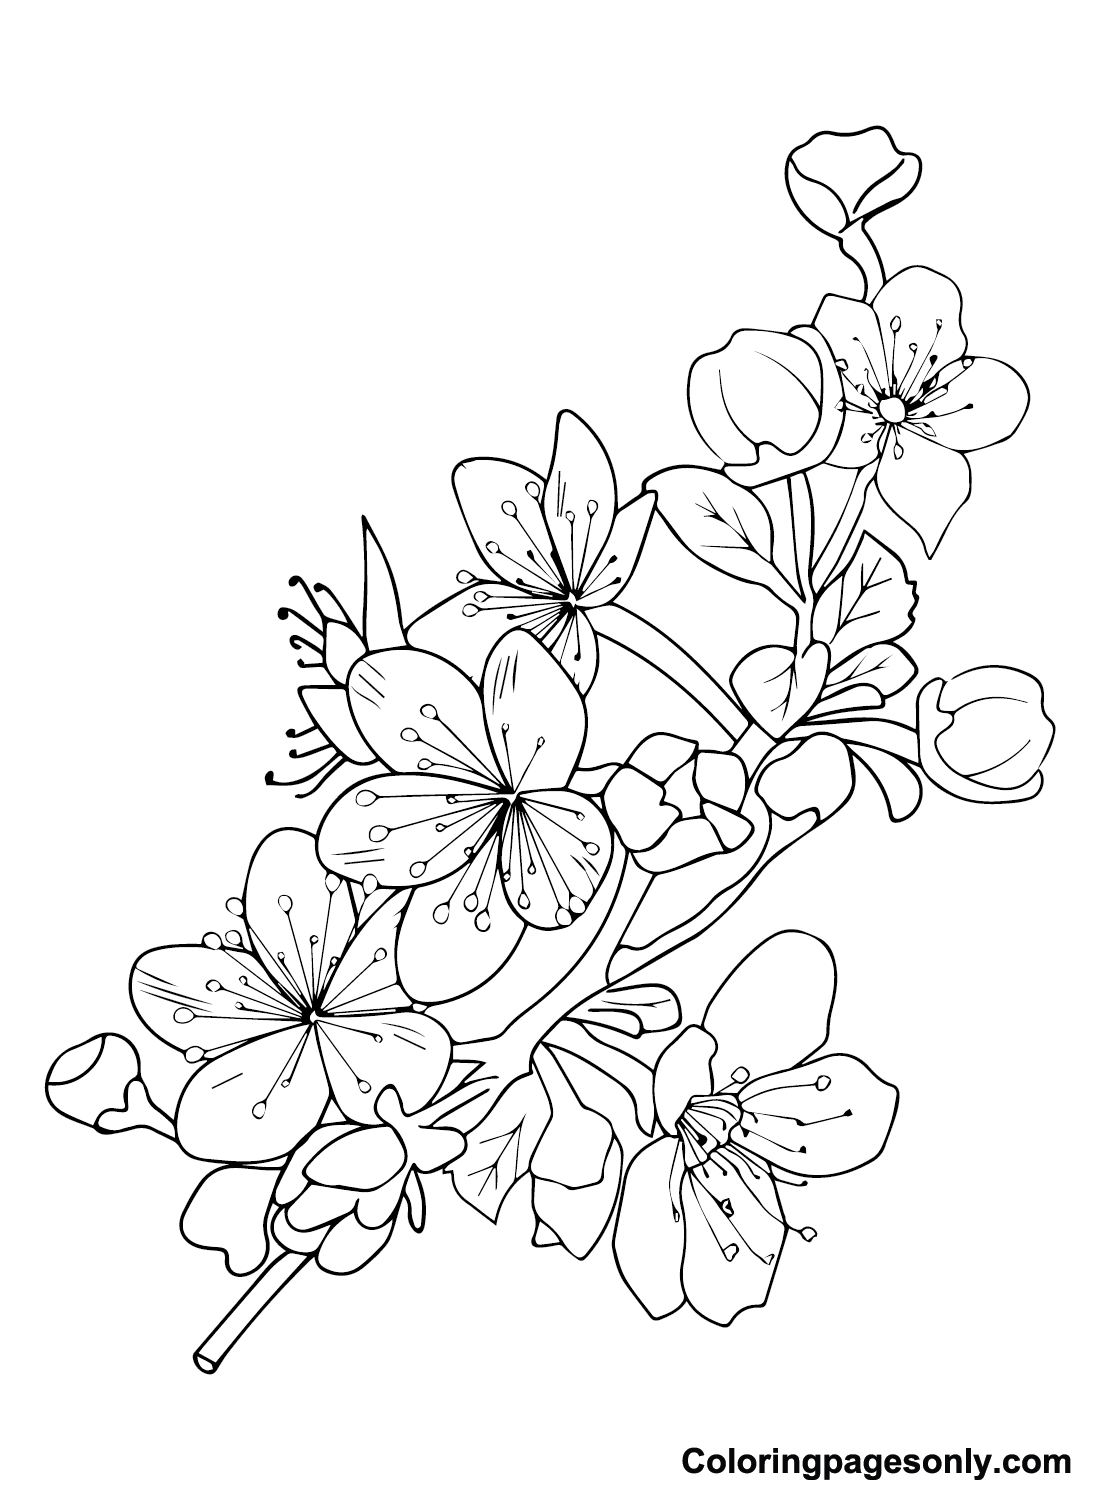 Cherry Blossom to Download Coloring Page